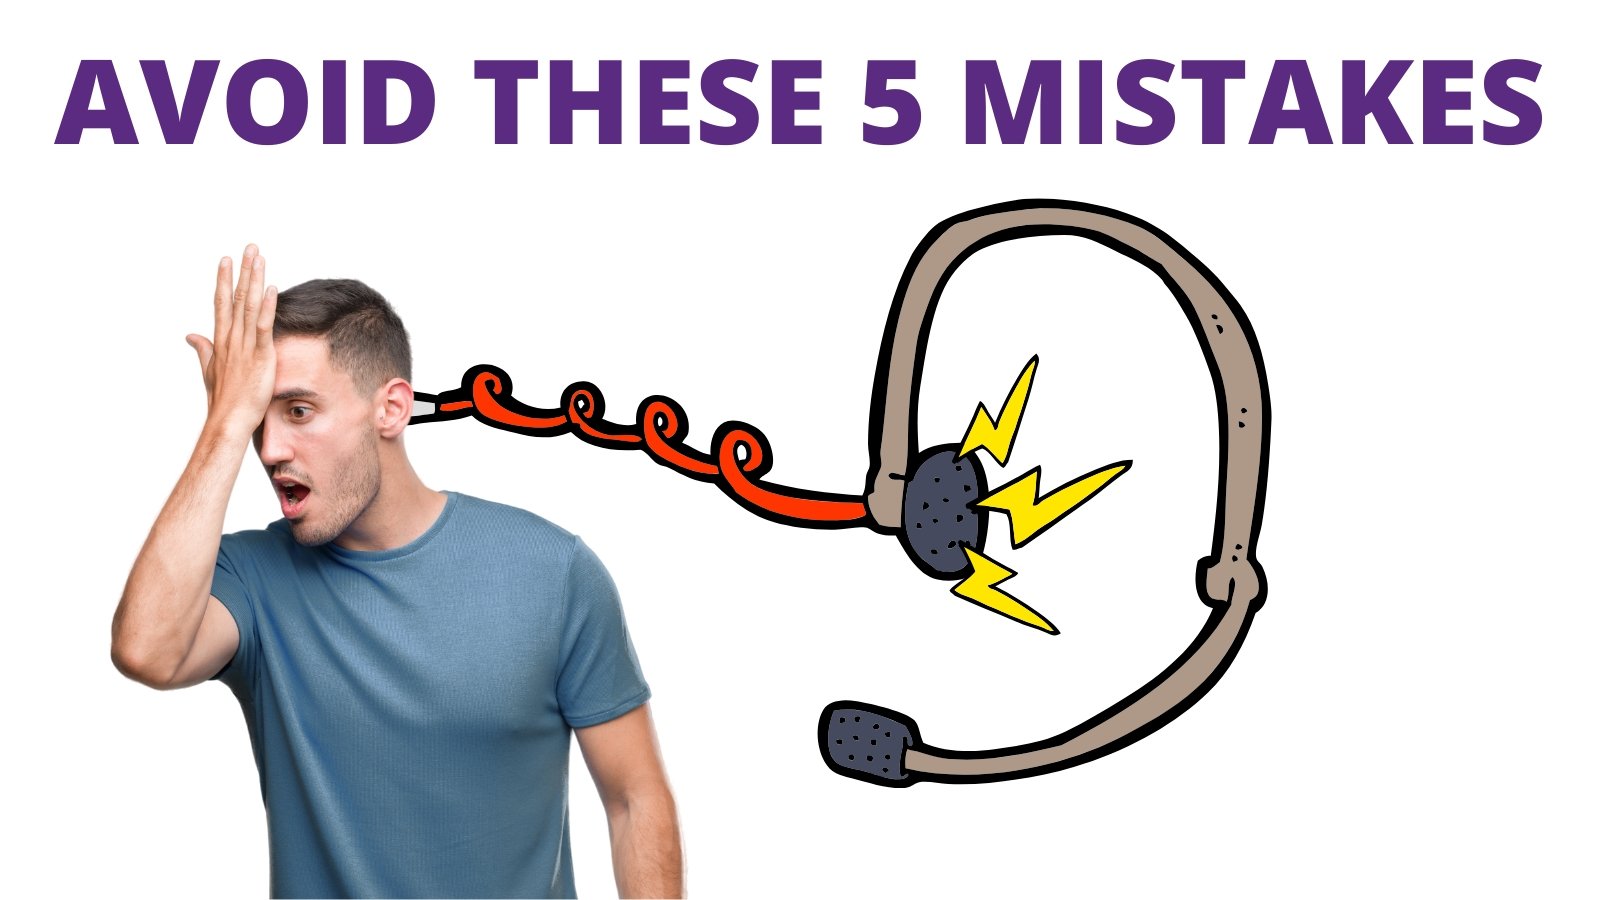 Avoid These 5 Mistakes When Purchasing Headsets 2020 - Headset Advisor